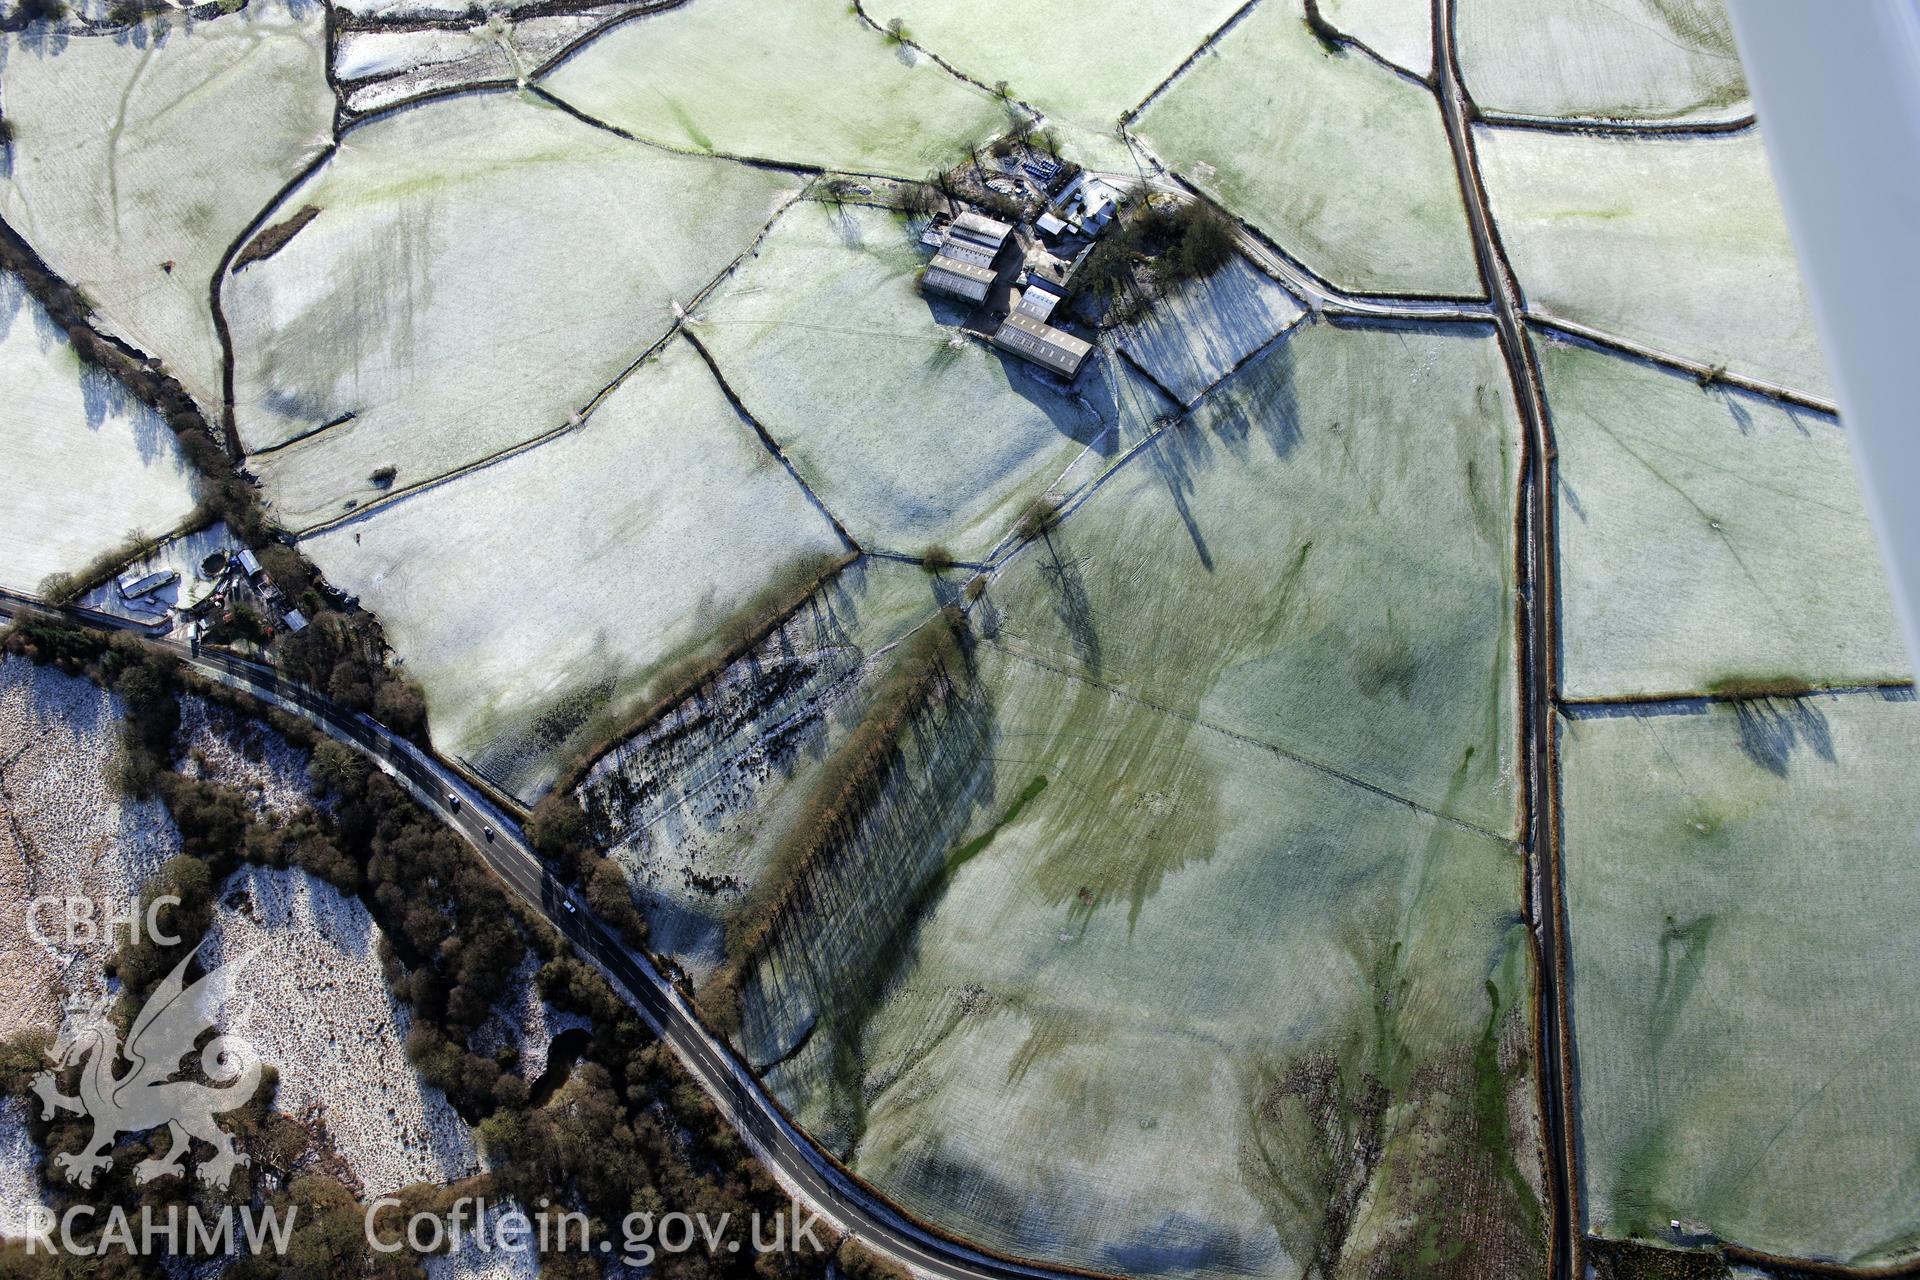 Twdin or Caerau Motte, Caerau Roman fort and military settlement, and the Roman road from Carmarthen to Castell Collen (RR623). Oblique aerial photograph taken during the RCAHMW?s programme of archaeological aerial reconnaissance by Toby Driver 15/01/2013.